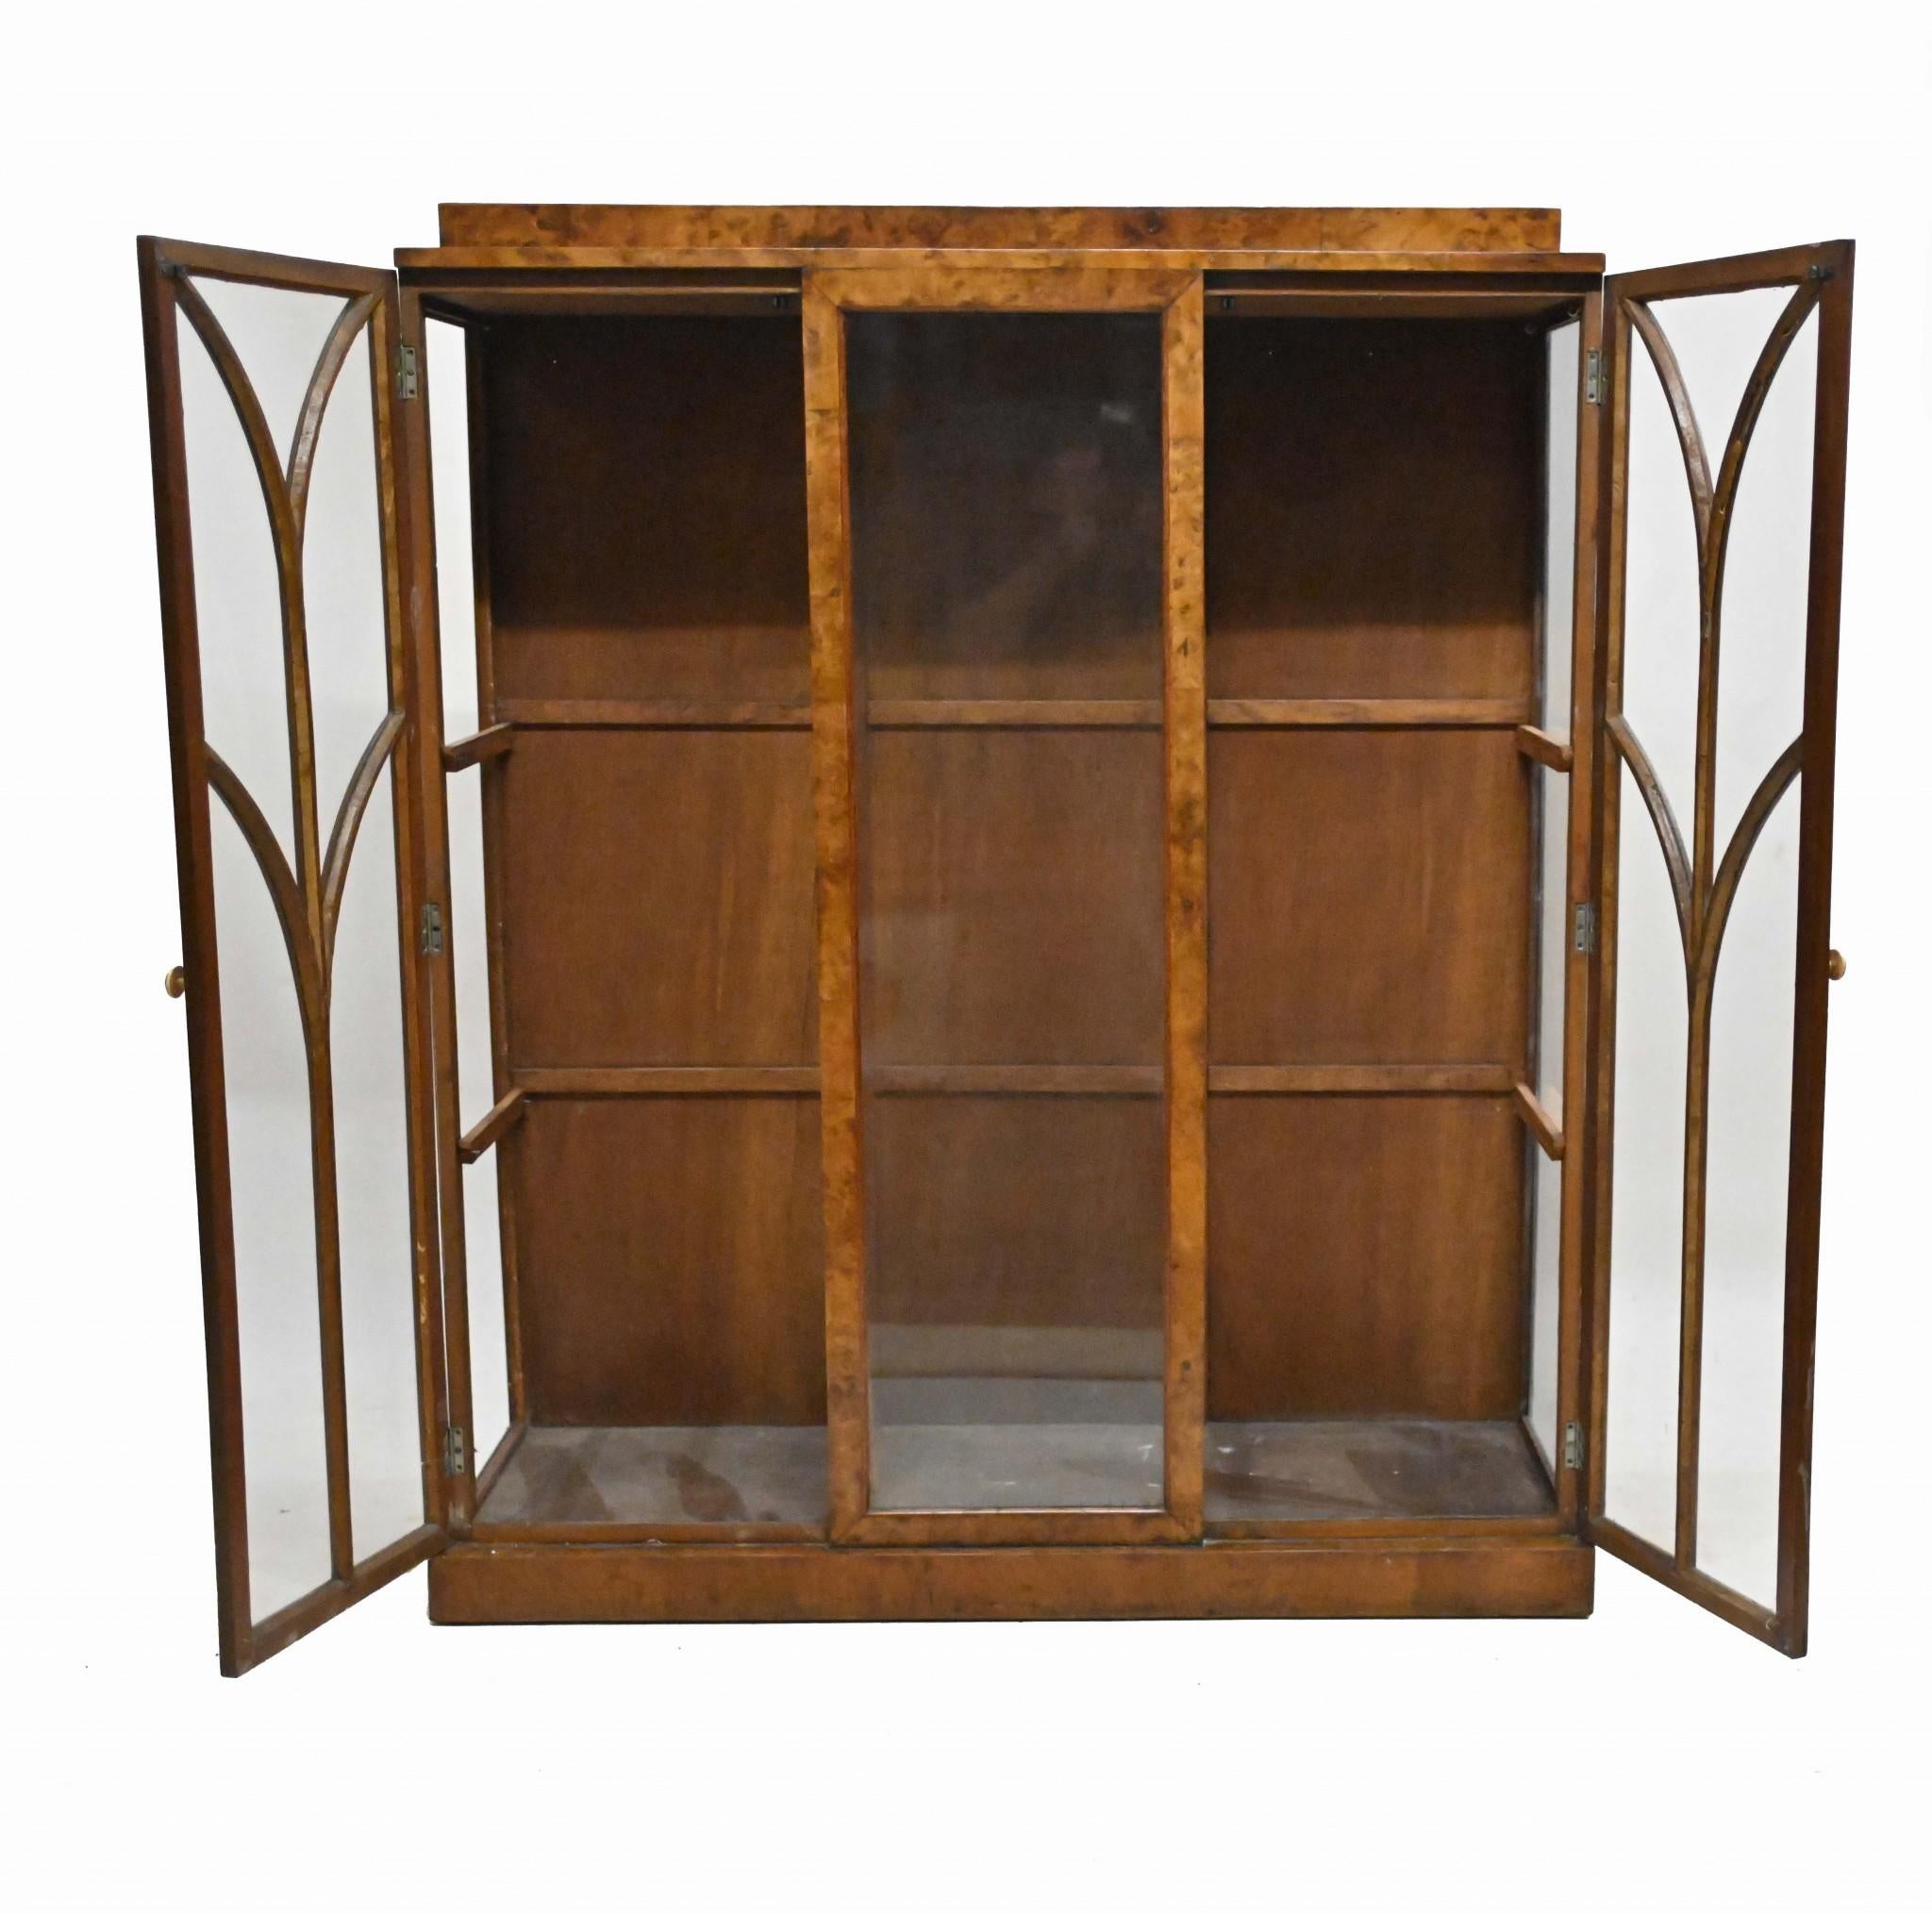 Period Art Deco China Cabinet 1930s Roaring Twenties In Good Condition For Sale In Potters Bar, GB